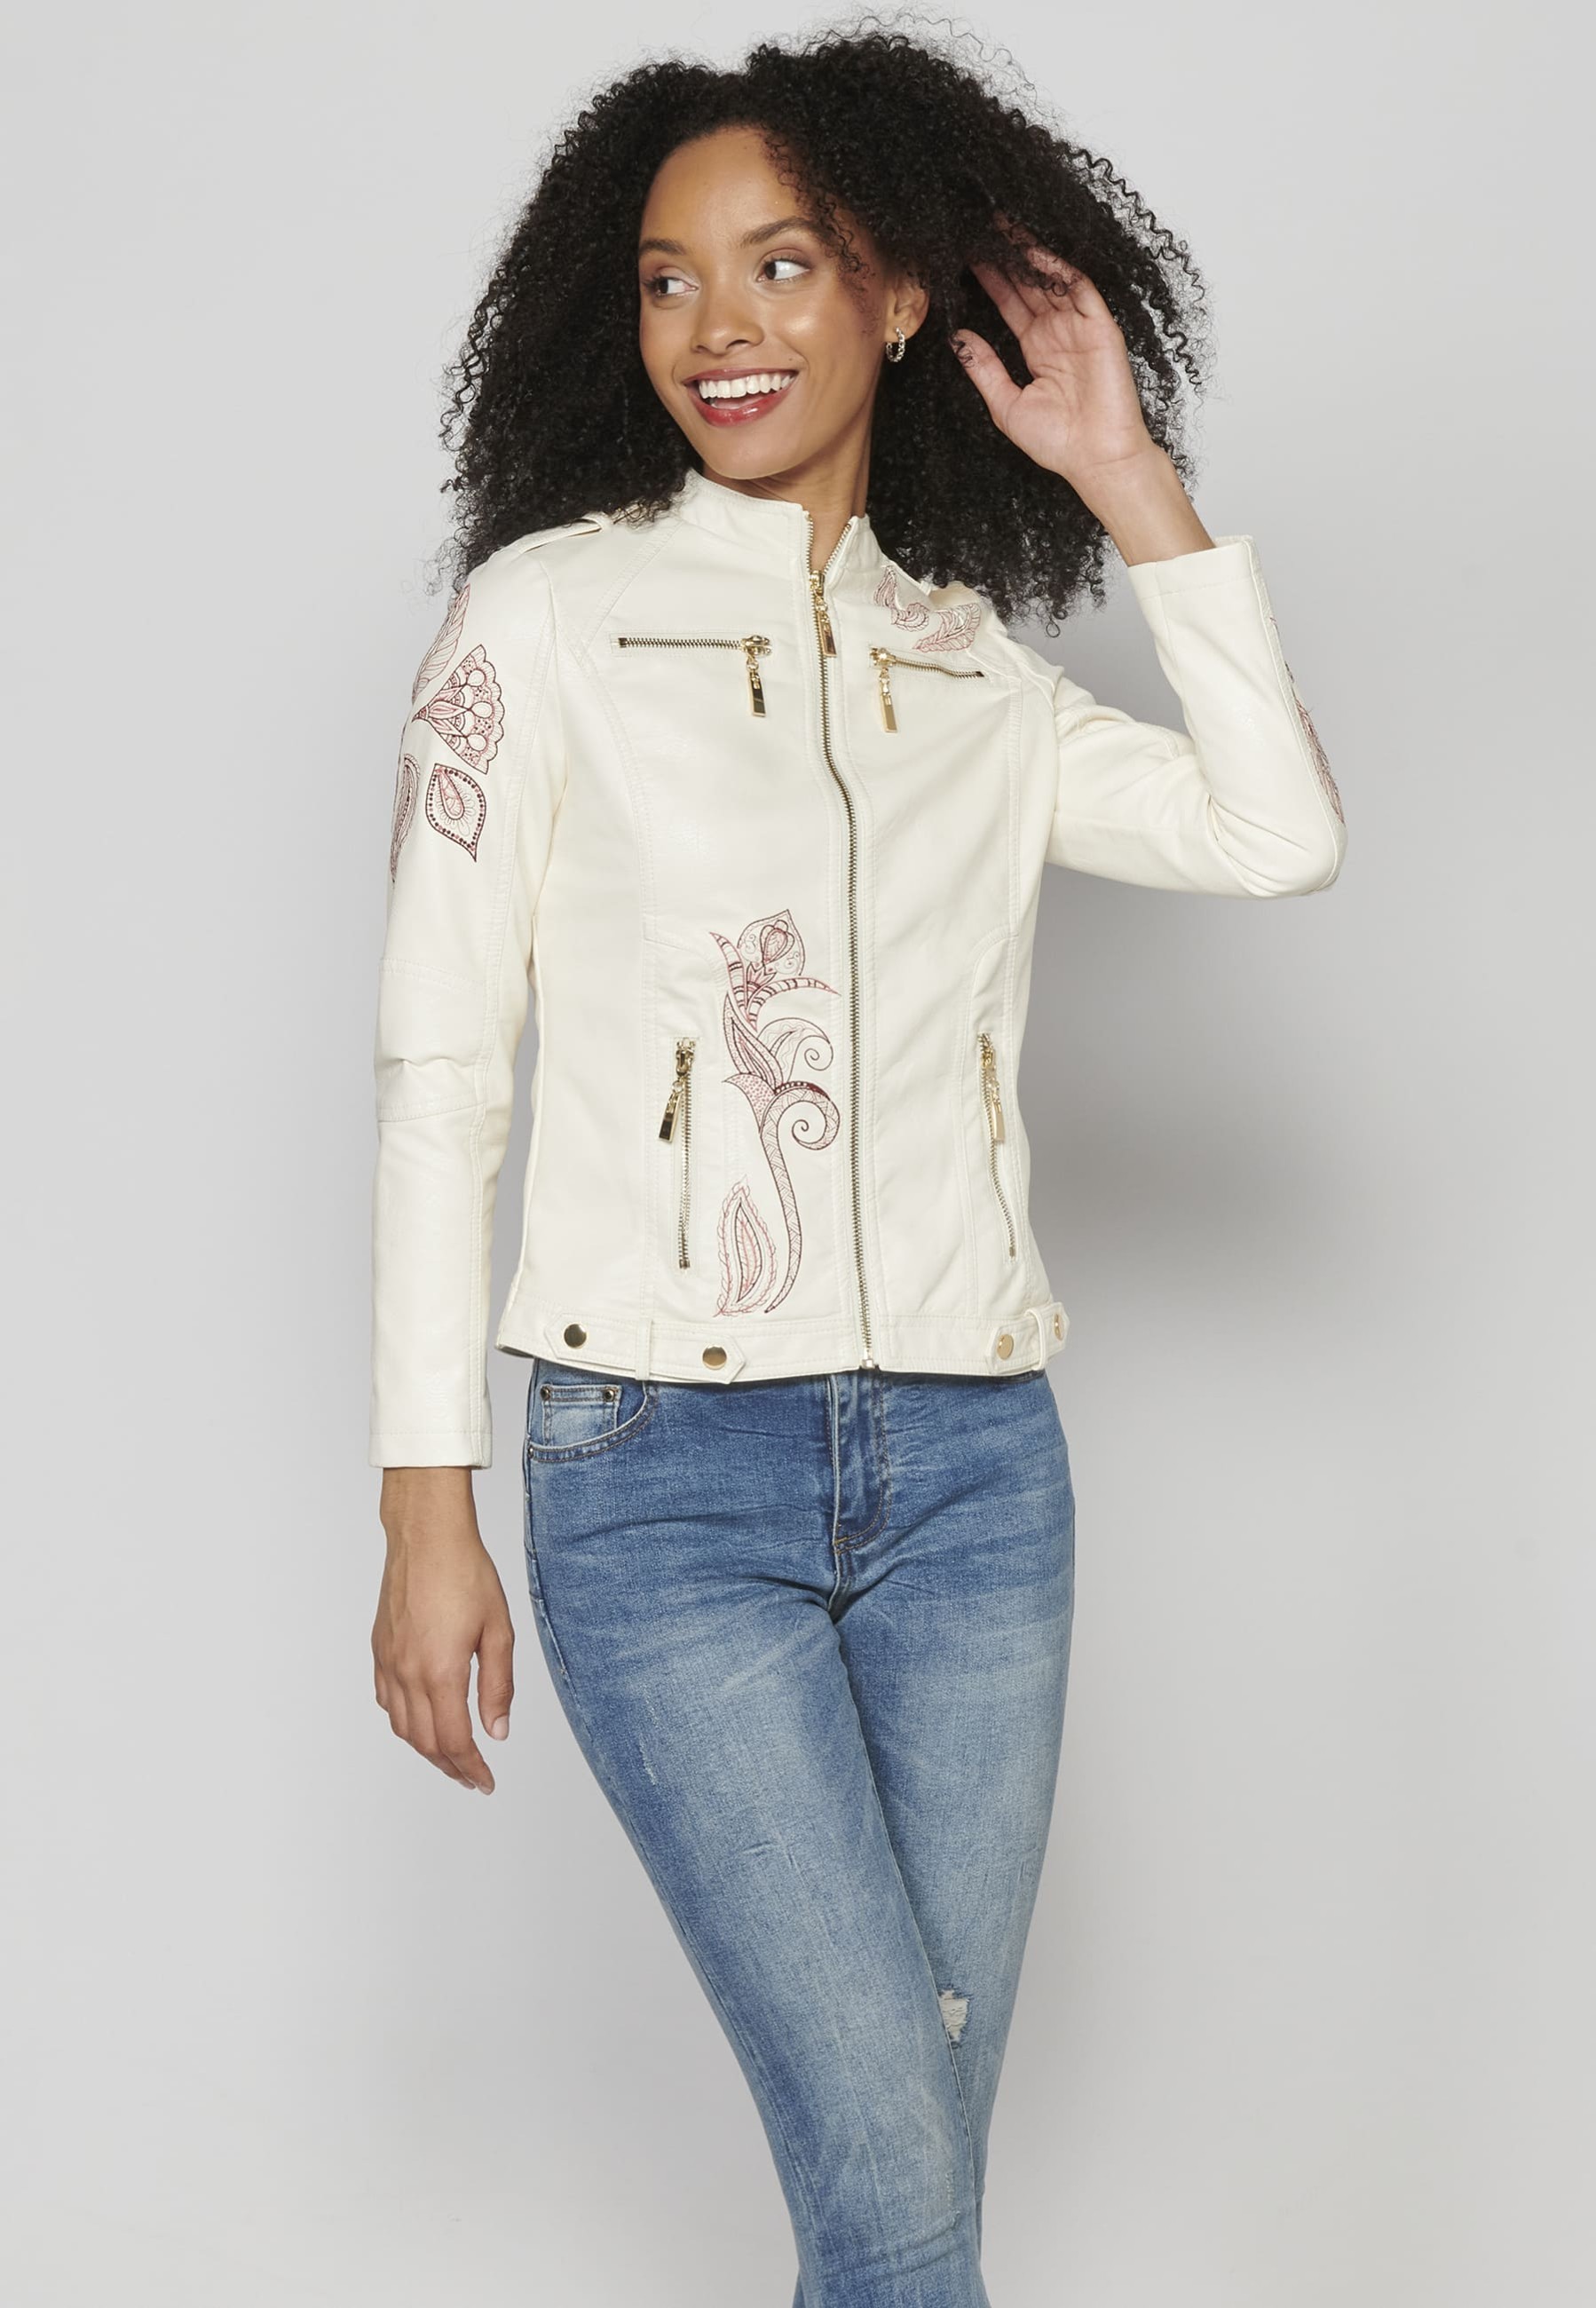 Women's leather-effect jacket with embroidered details